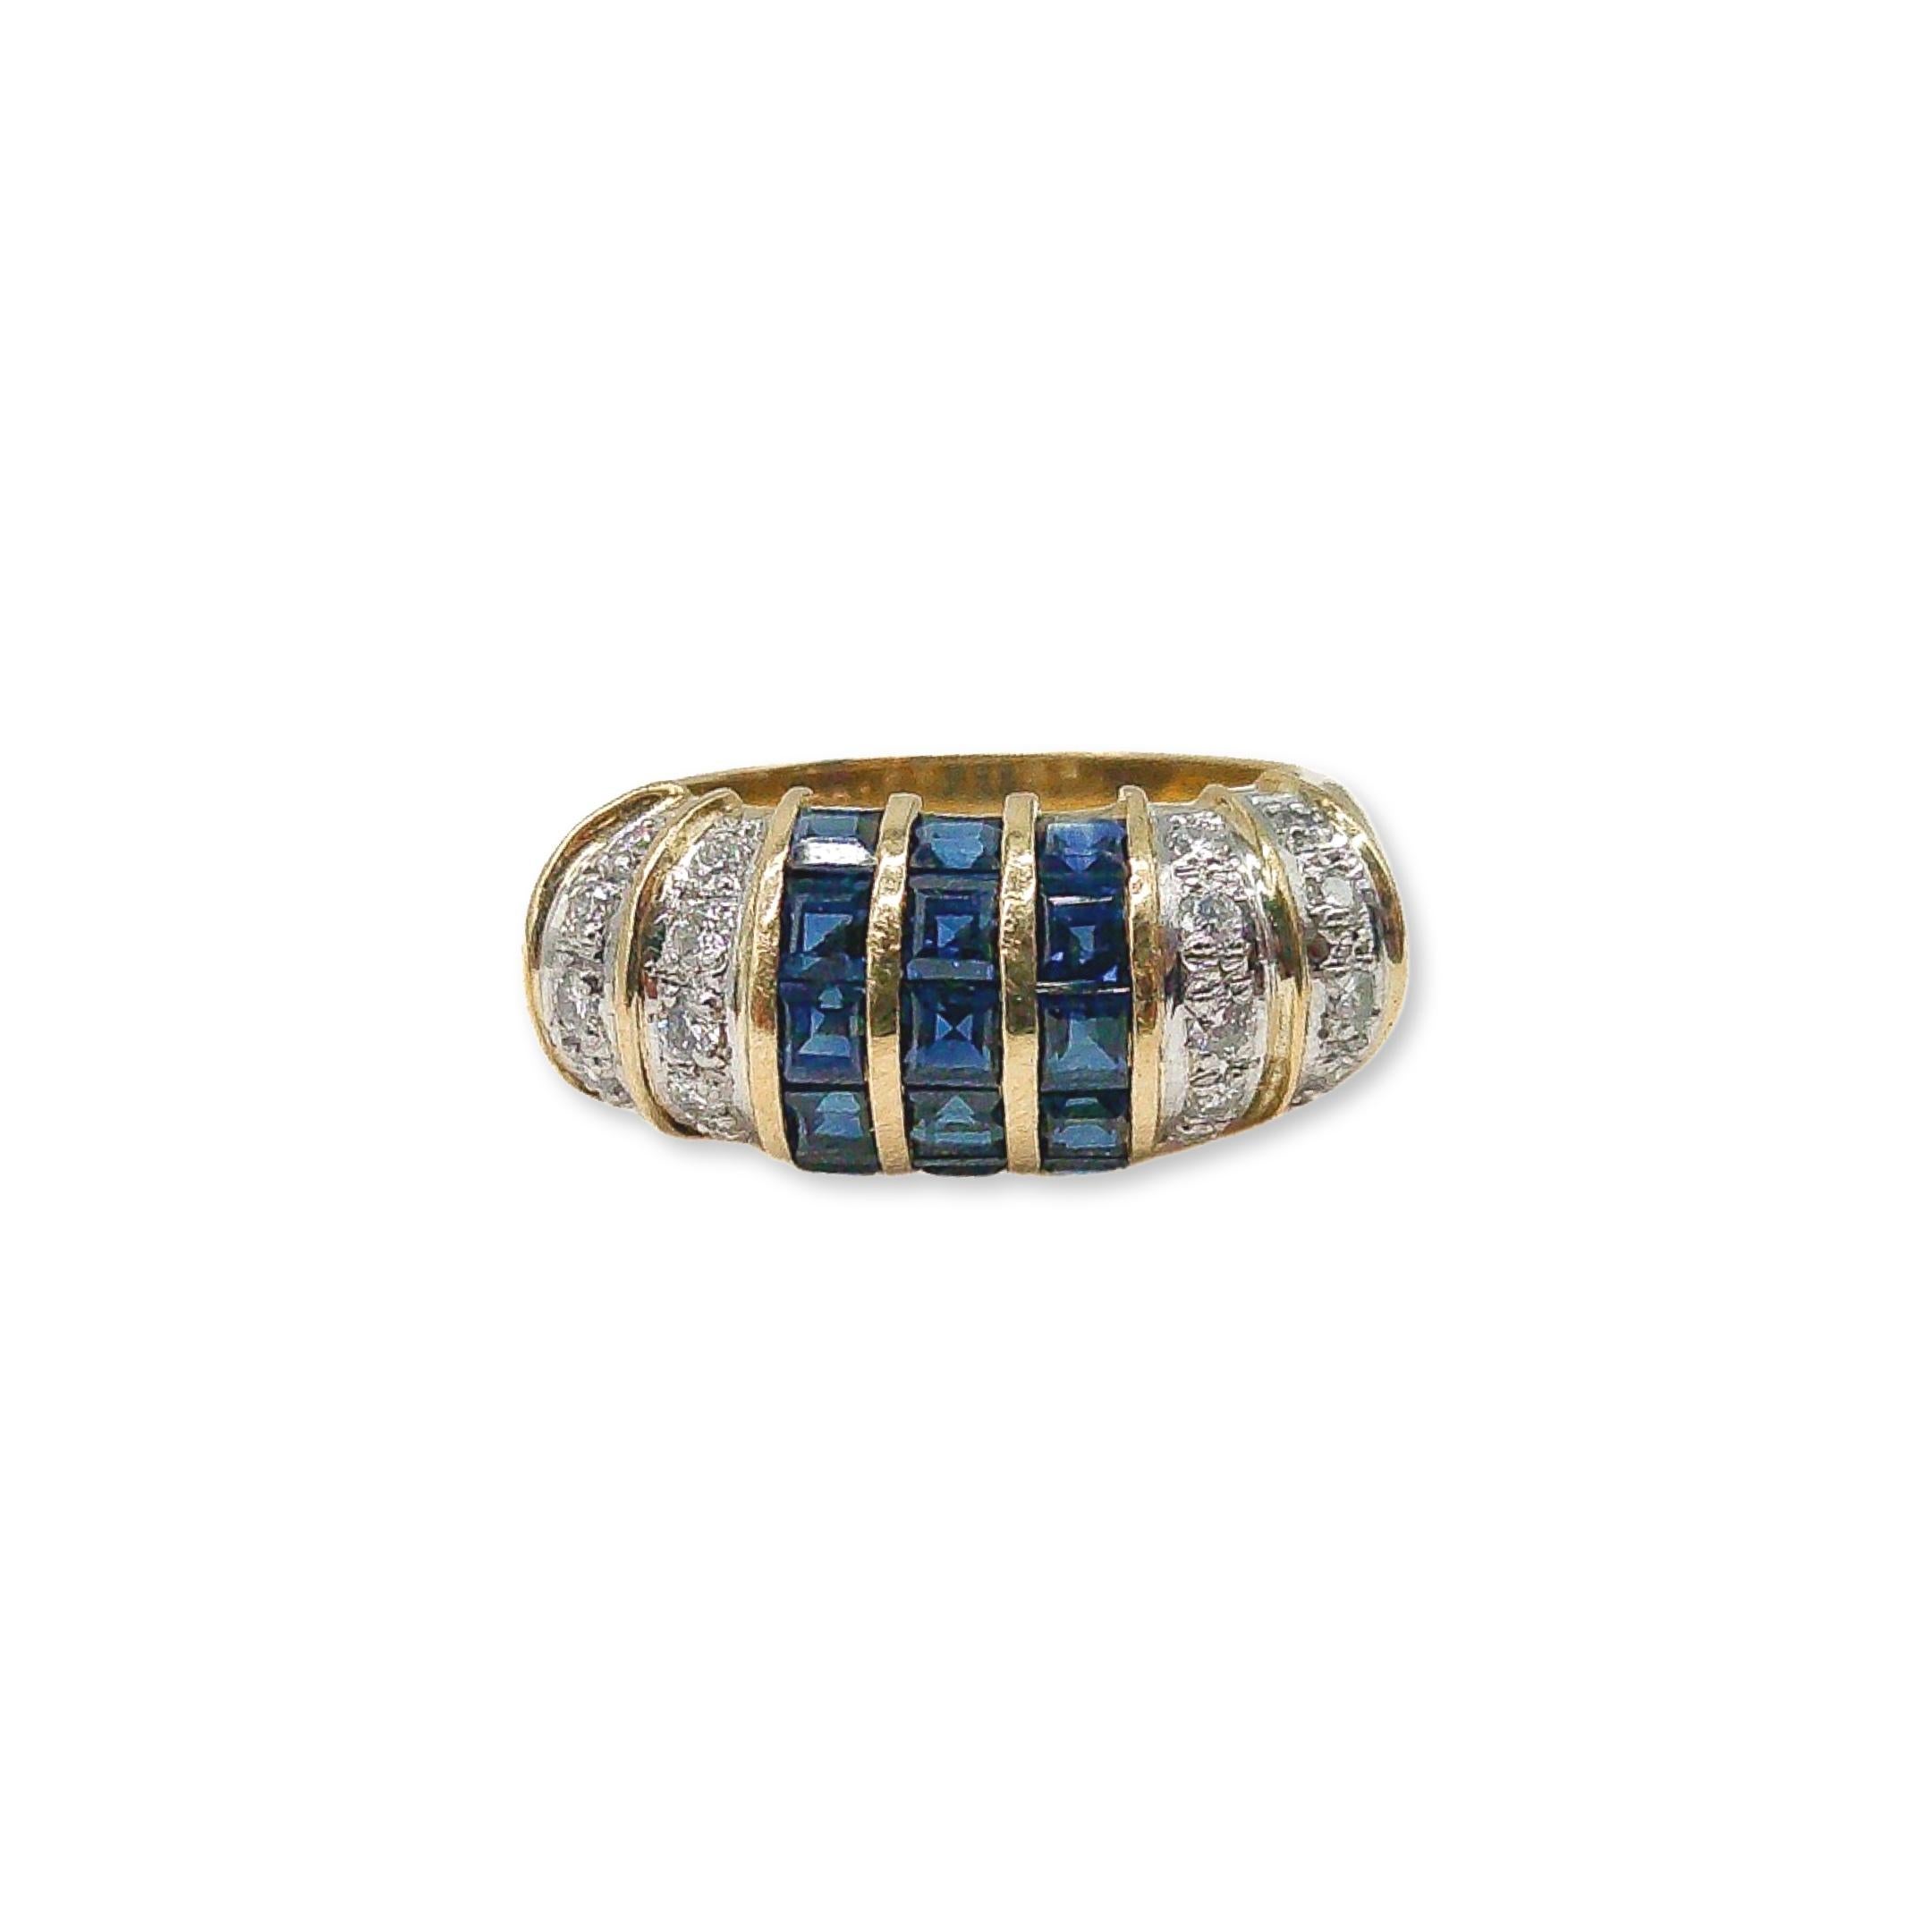 Step into a world of opulence and wonder, where the brilliance of diamonds dances in perfect harmony with the deep allure of the sapphires. Influenced by the everlasting charm of vintage style, this Retro Diamond and Sapphire Domed Ring is a